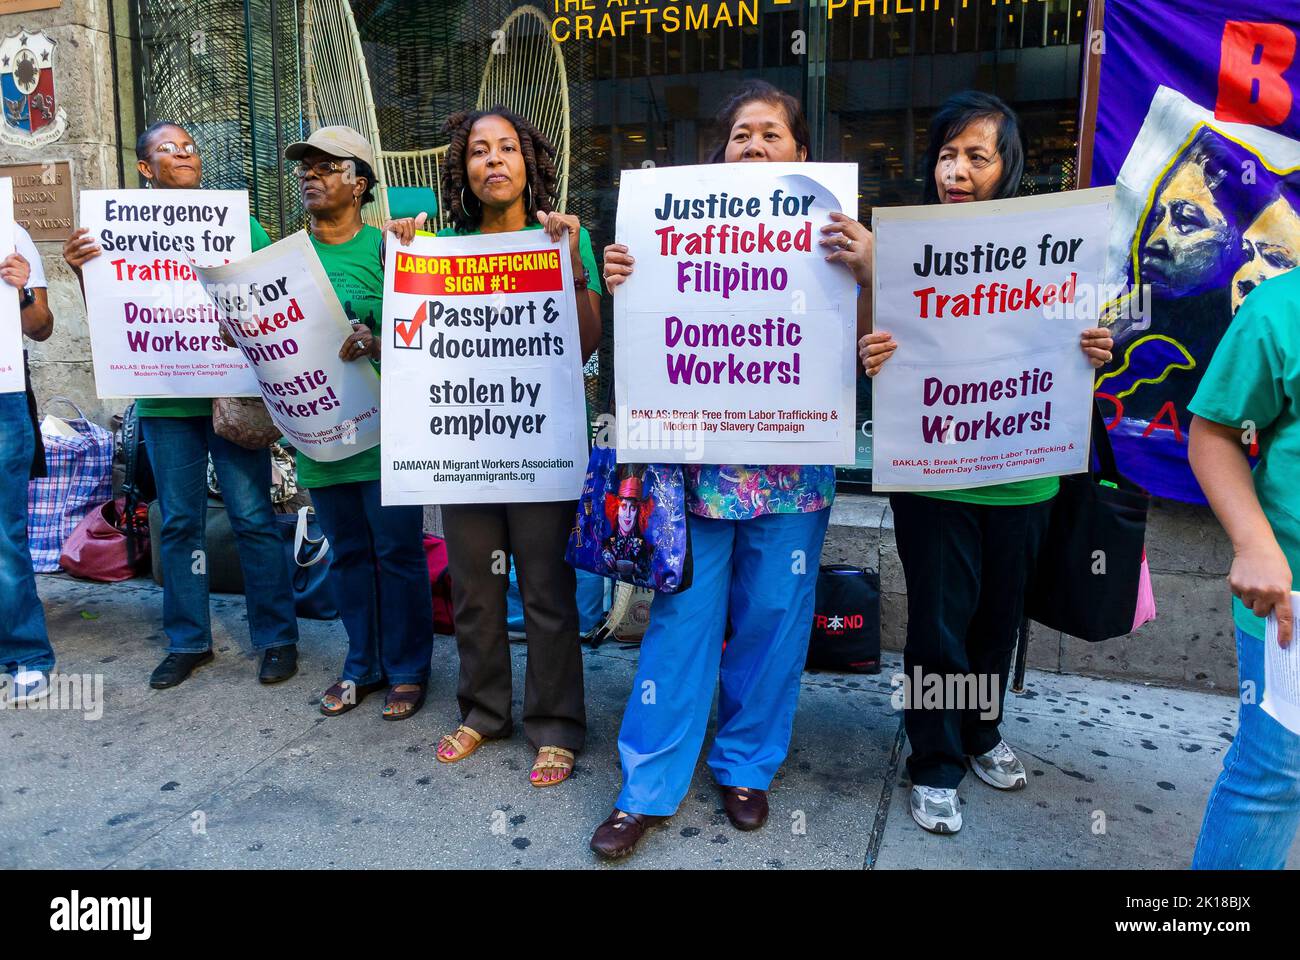 New York CIty, NY, USA, Group Immigrant WOmen Demonstrating Against Human Trafficking of Filipino Domestic Workers, Maids, Holding Protest Signs on Street, discrimination us, women with signs Stock Photo